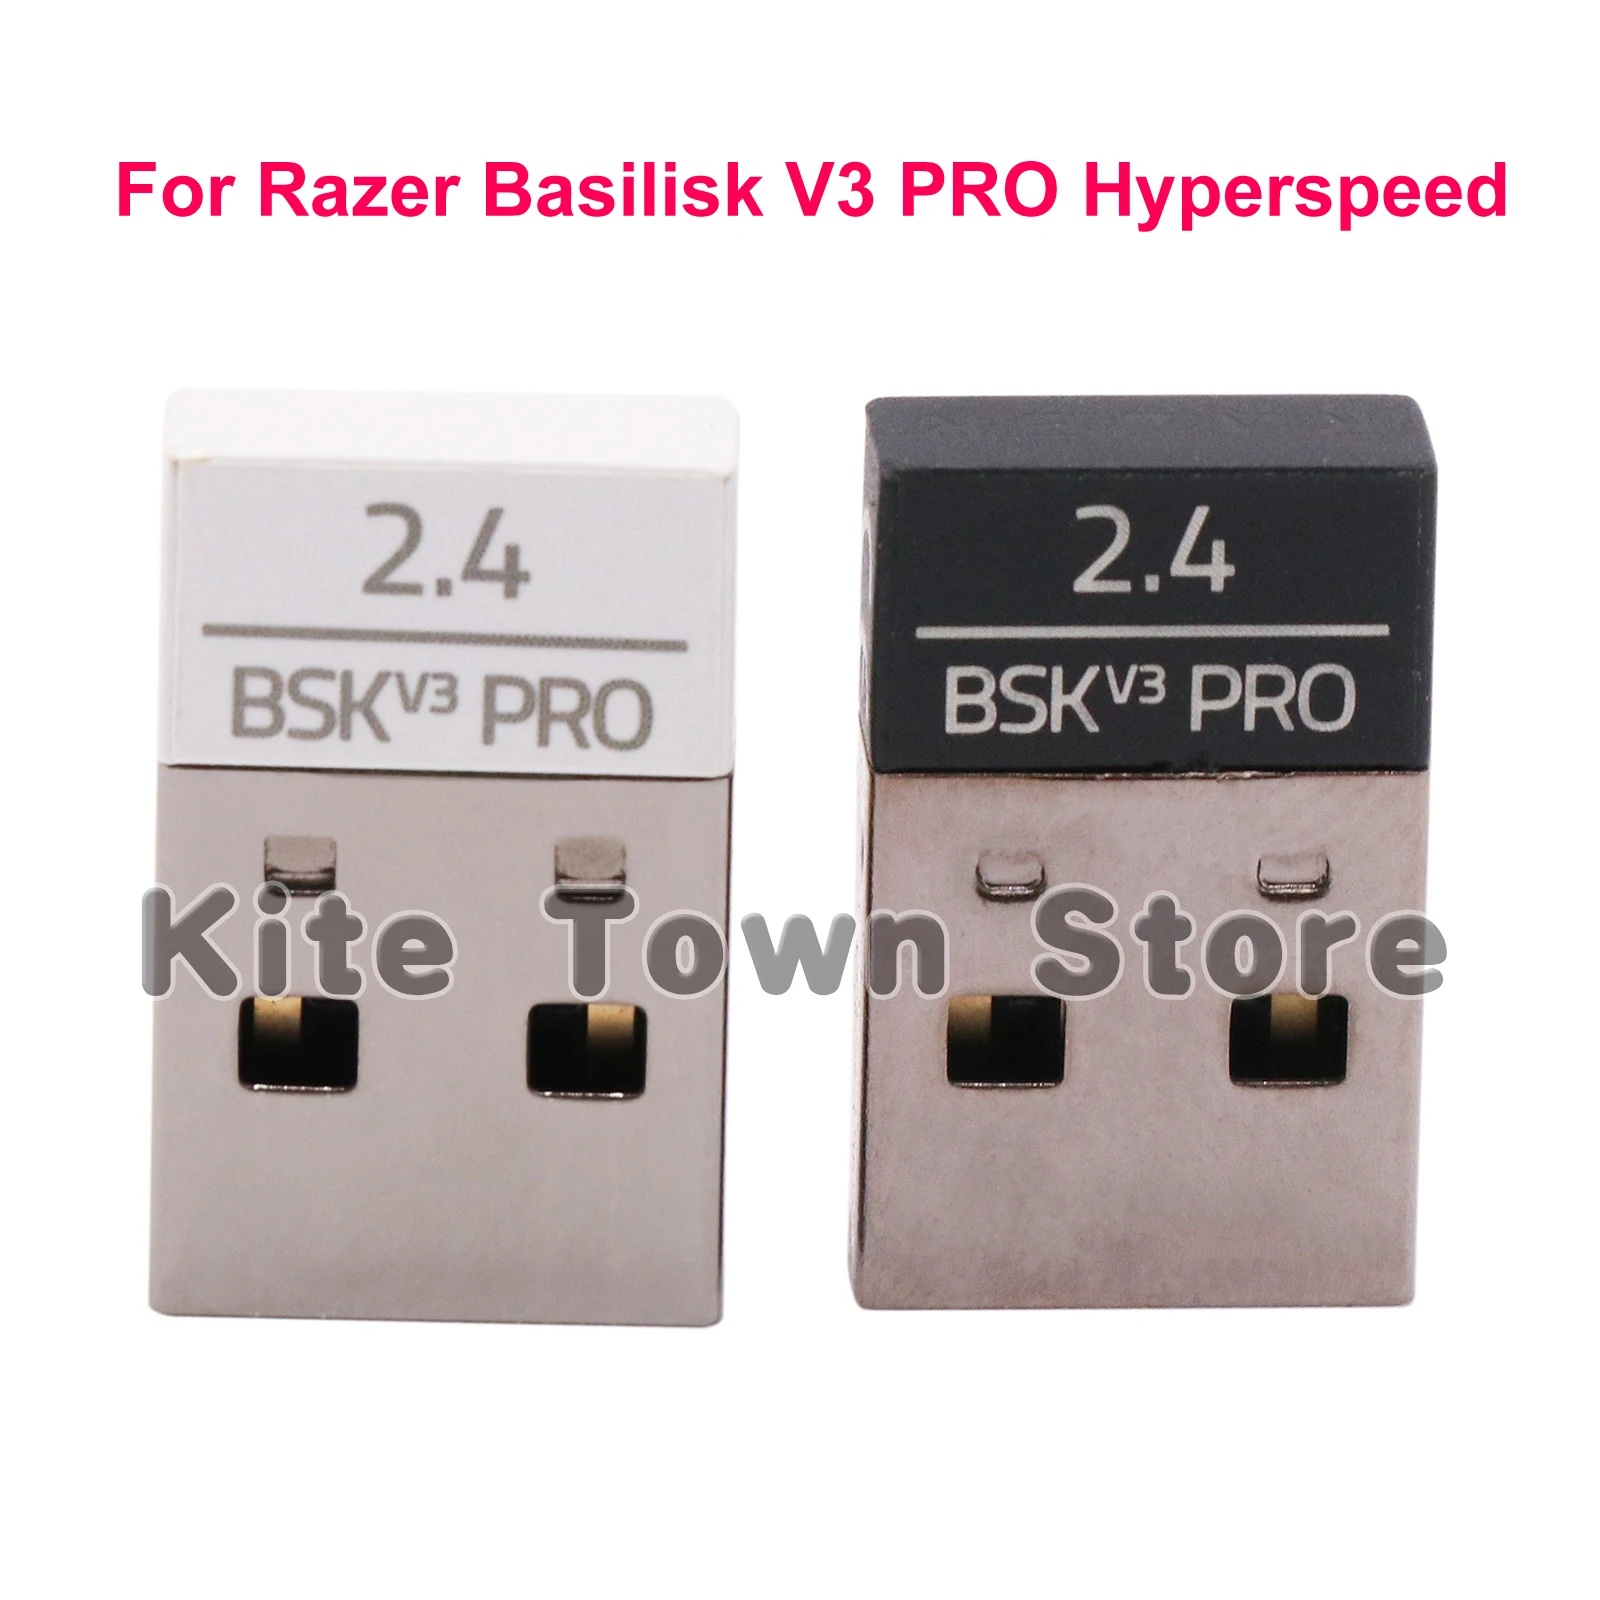 

2.4G USB Dongle Mouse Receiver Replacement for Razer Basilisk V3 PRO Hyperspeed Wireless Gaming Mouse